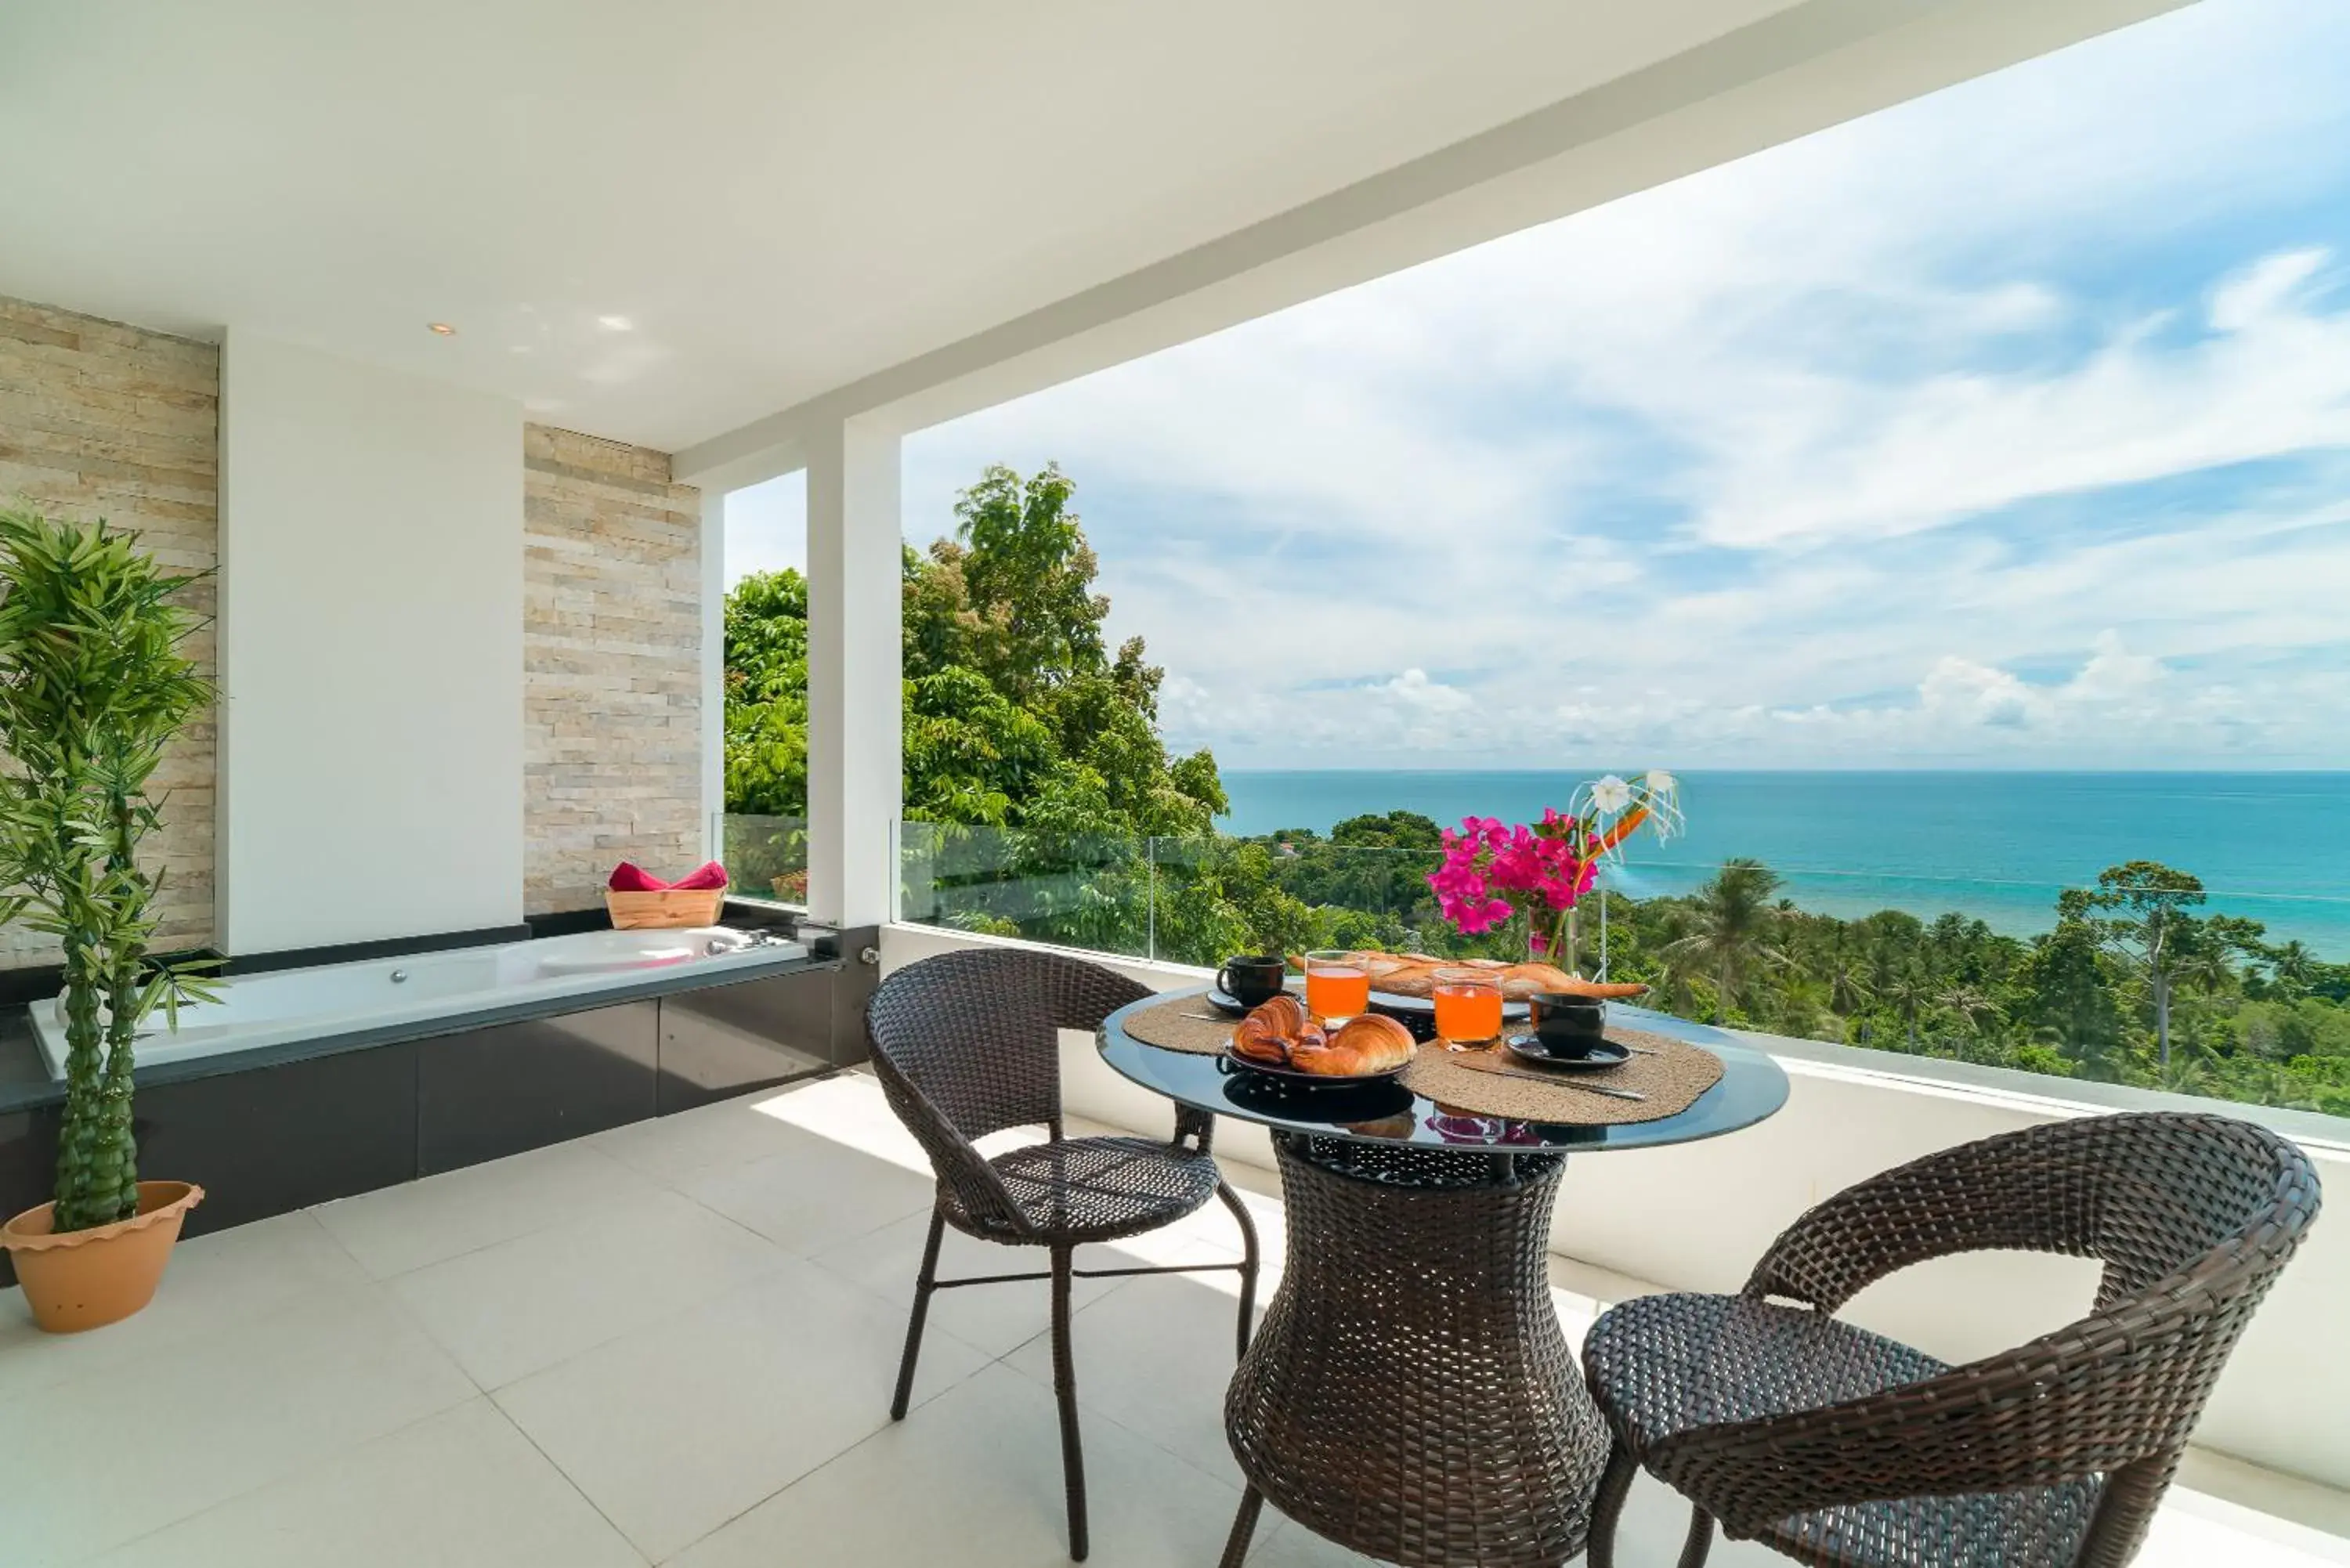 Patio in Tropical Sea View Residence